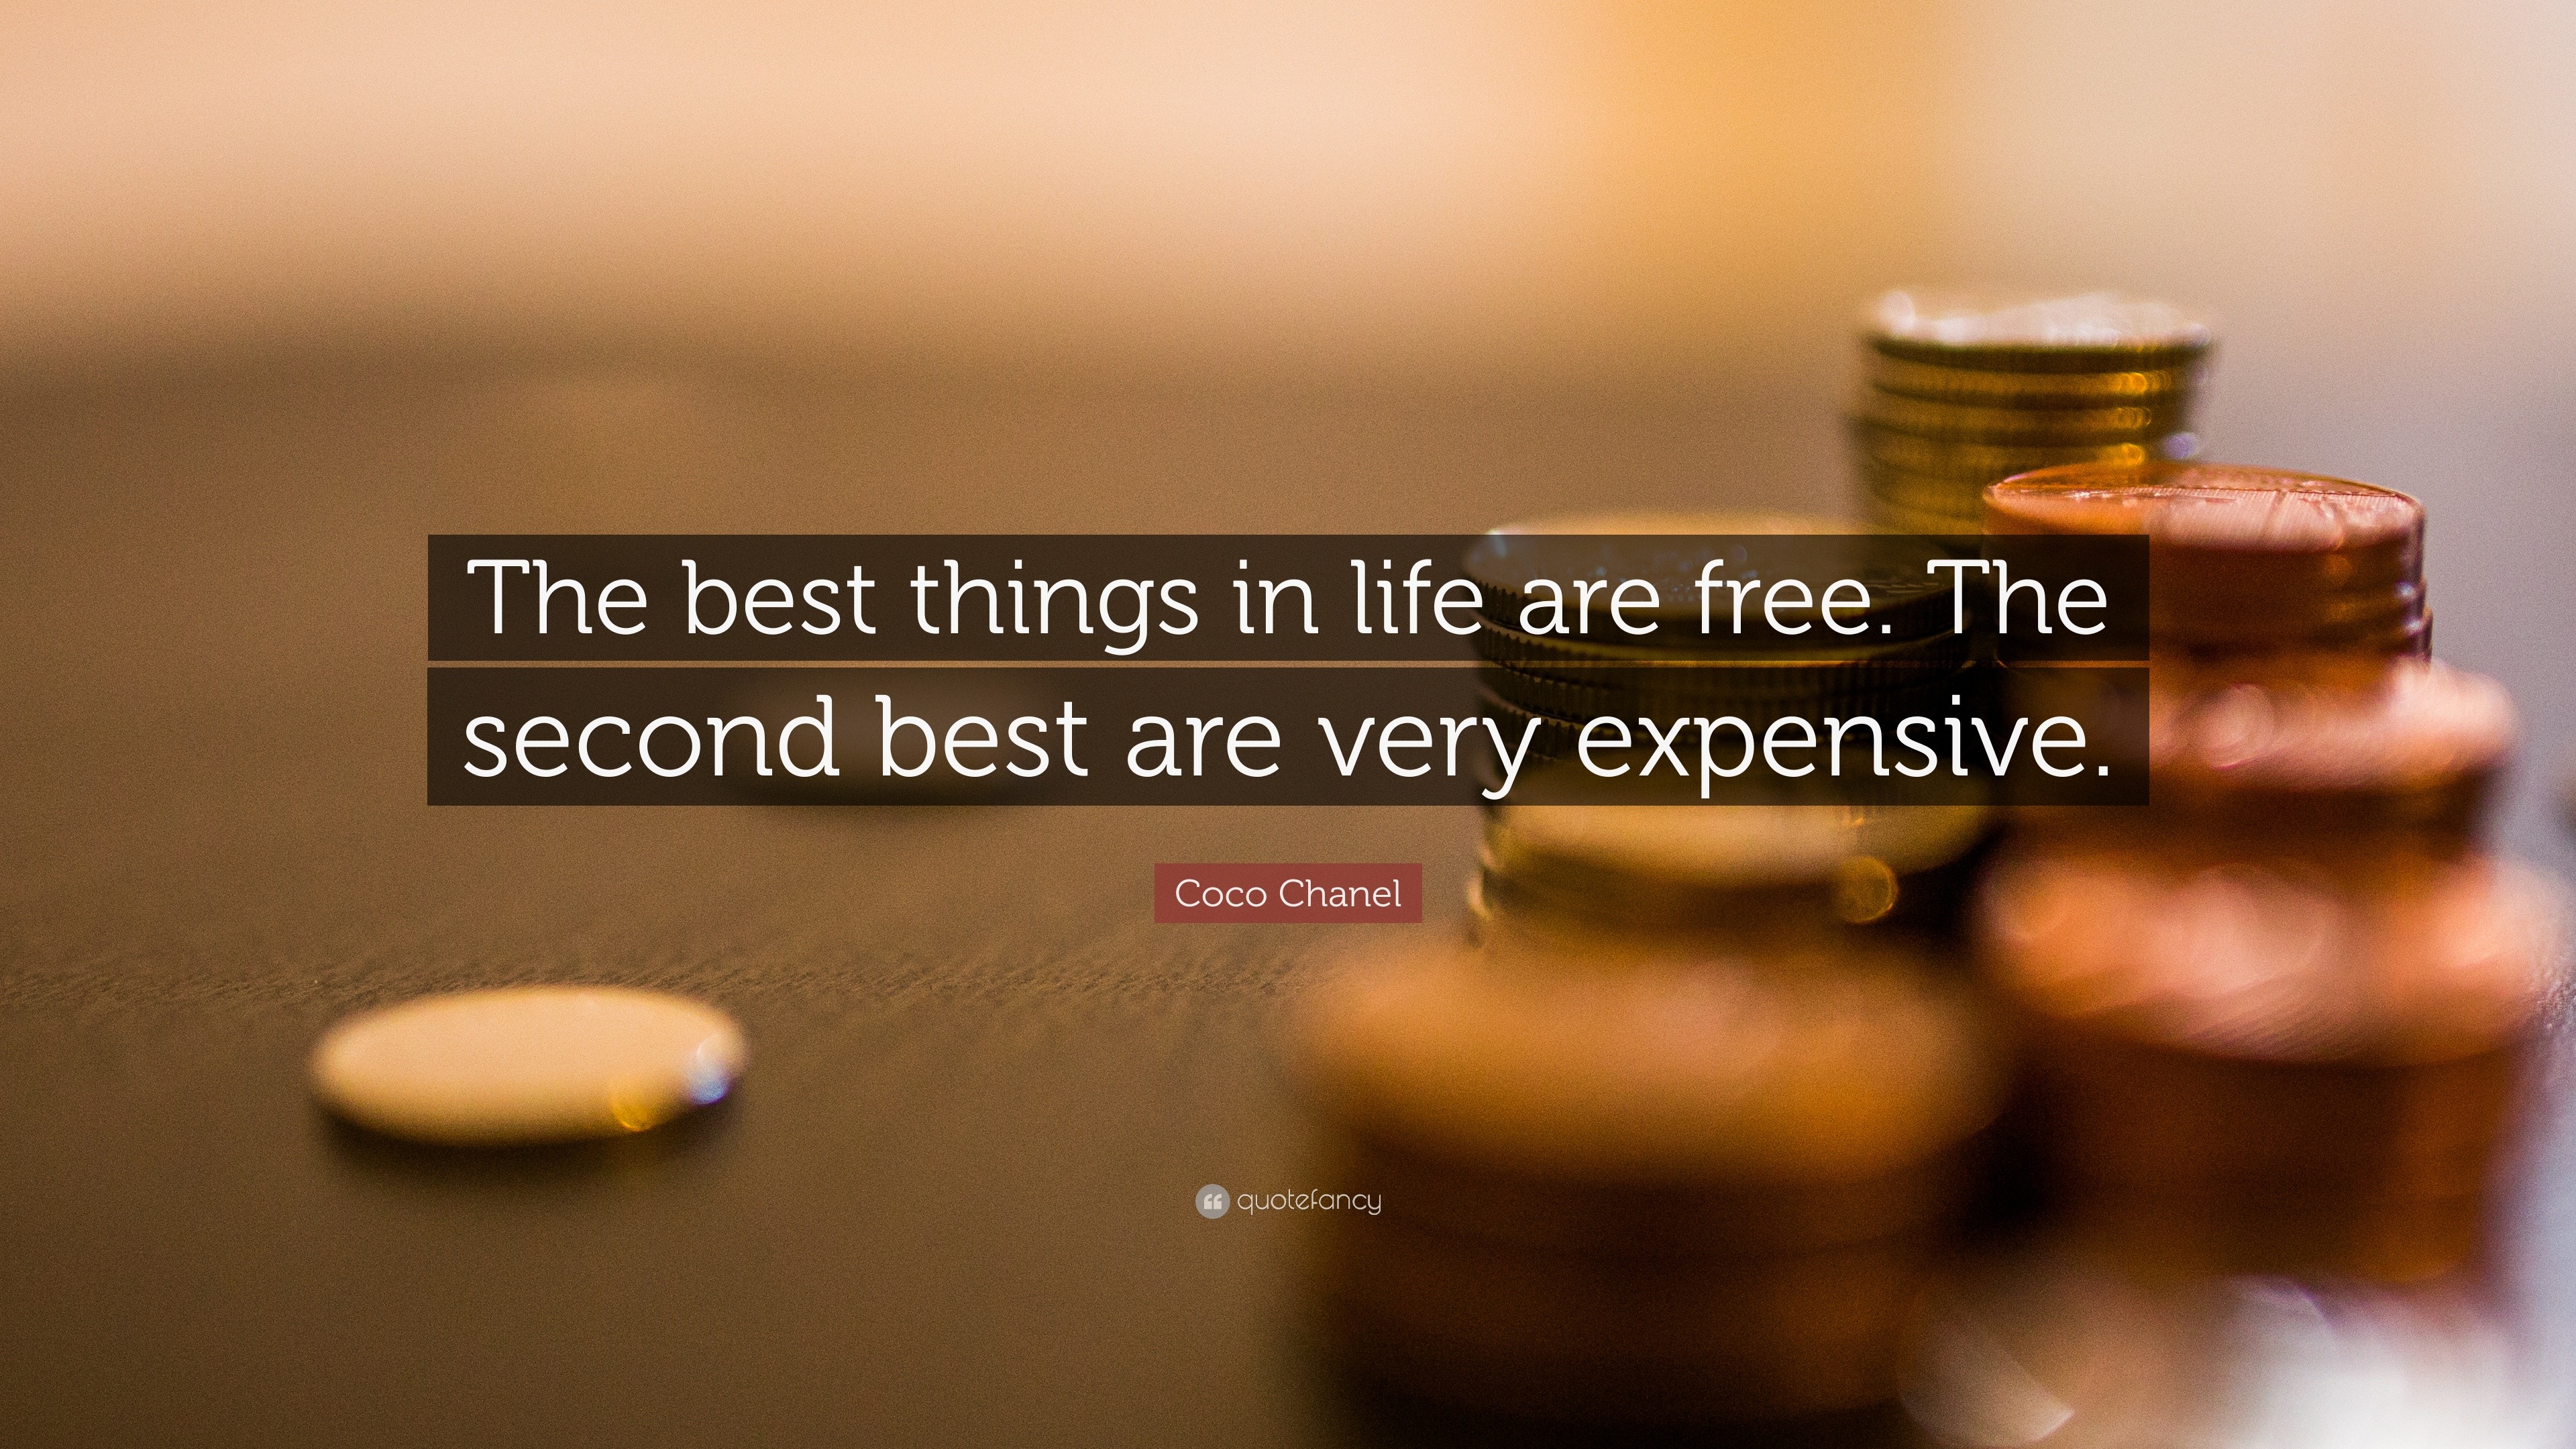 Coco Chanel Quote “The best things in life are free The second best